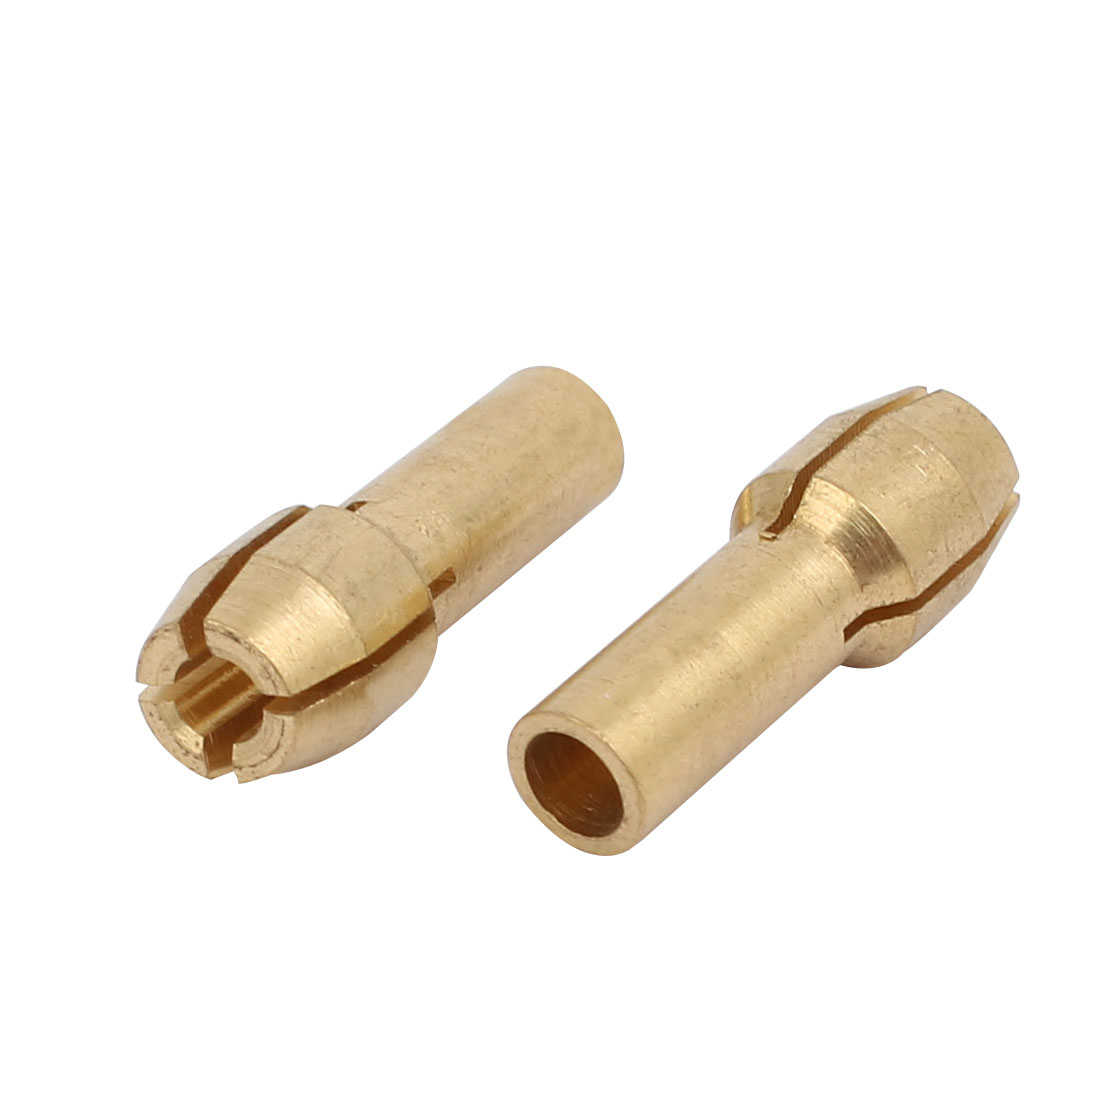 Unique Bargains 15pcs 2.4mm Clamping Dia Brass Qucik Change Collet Nut for Rotary Power Tool